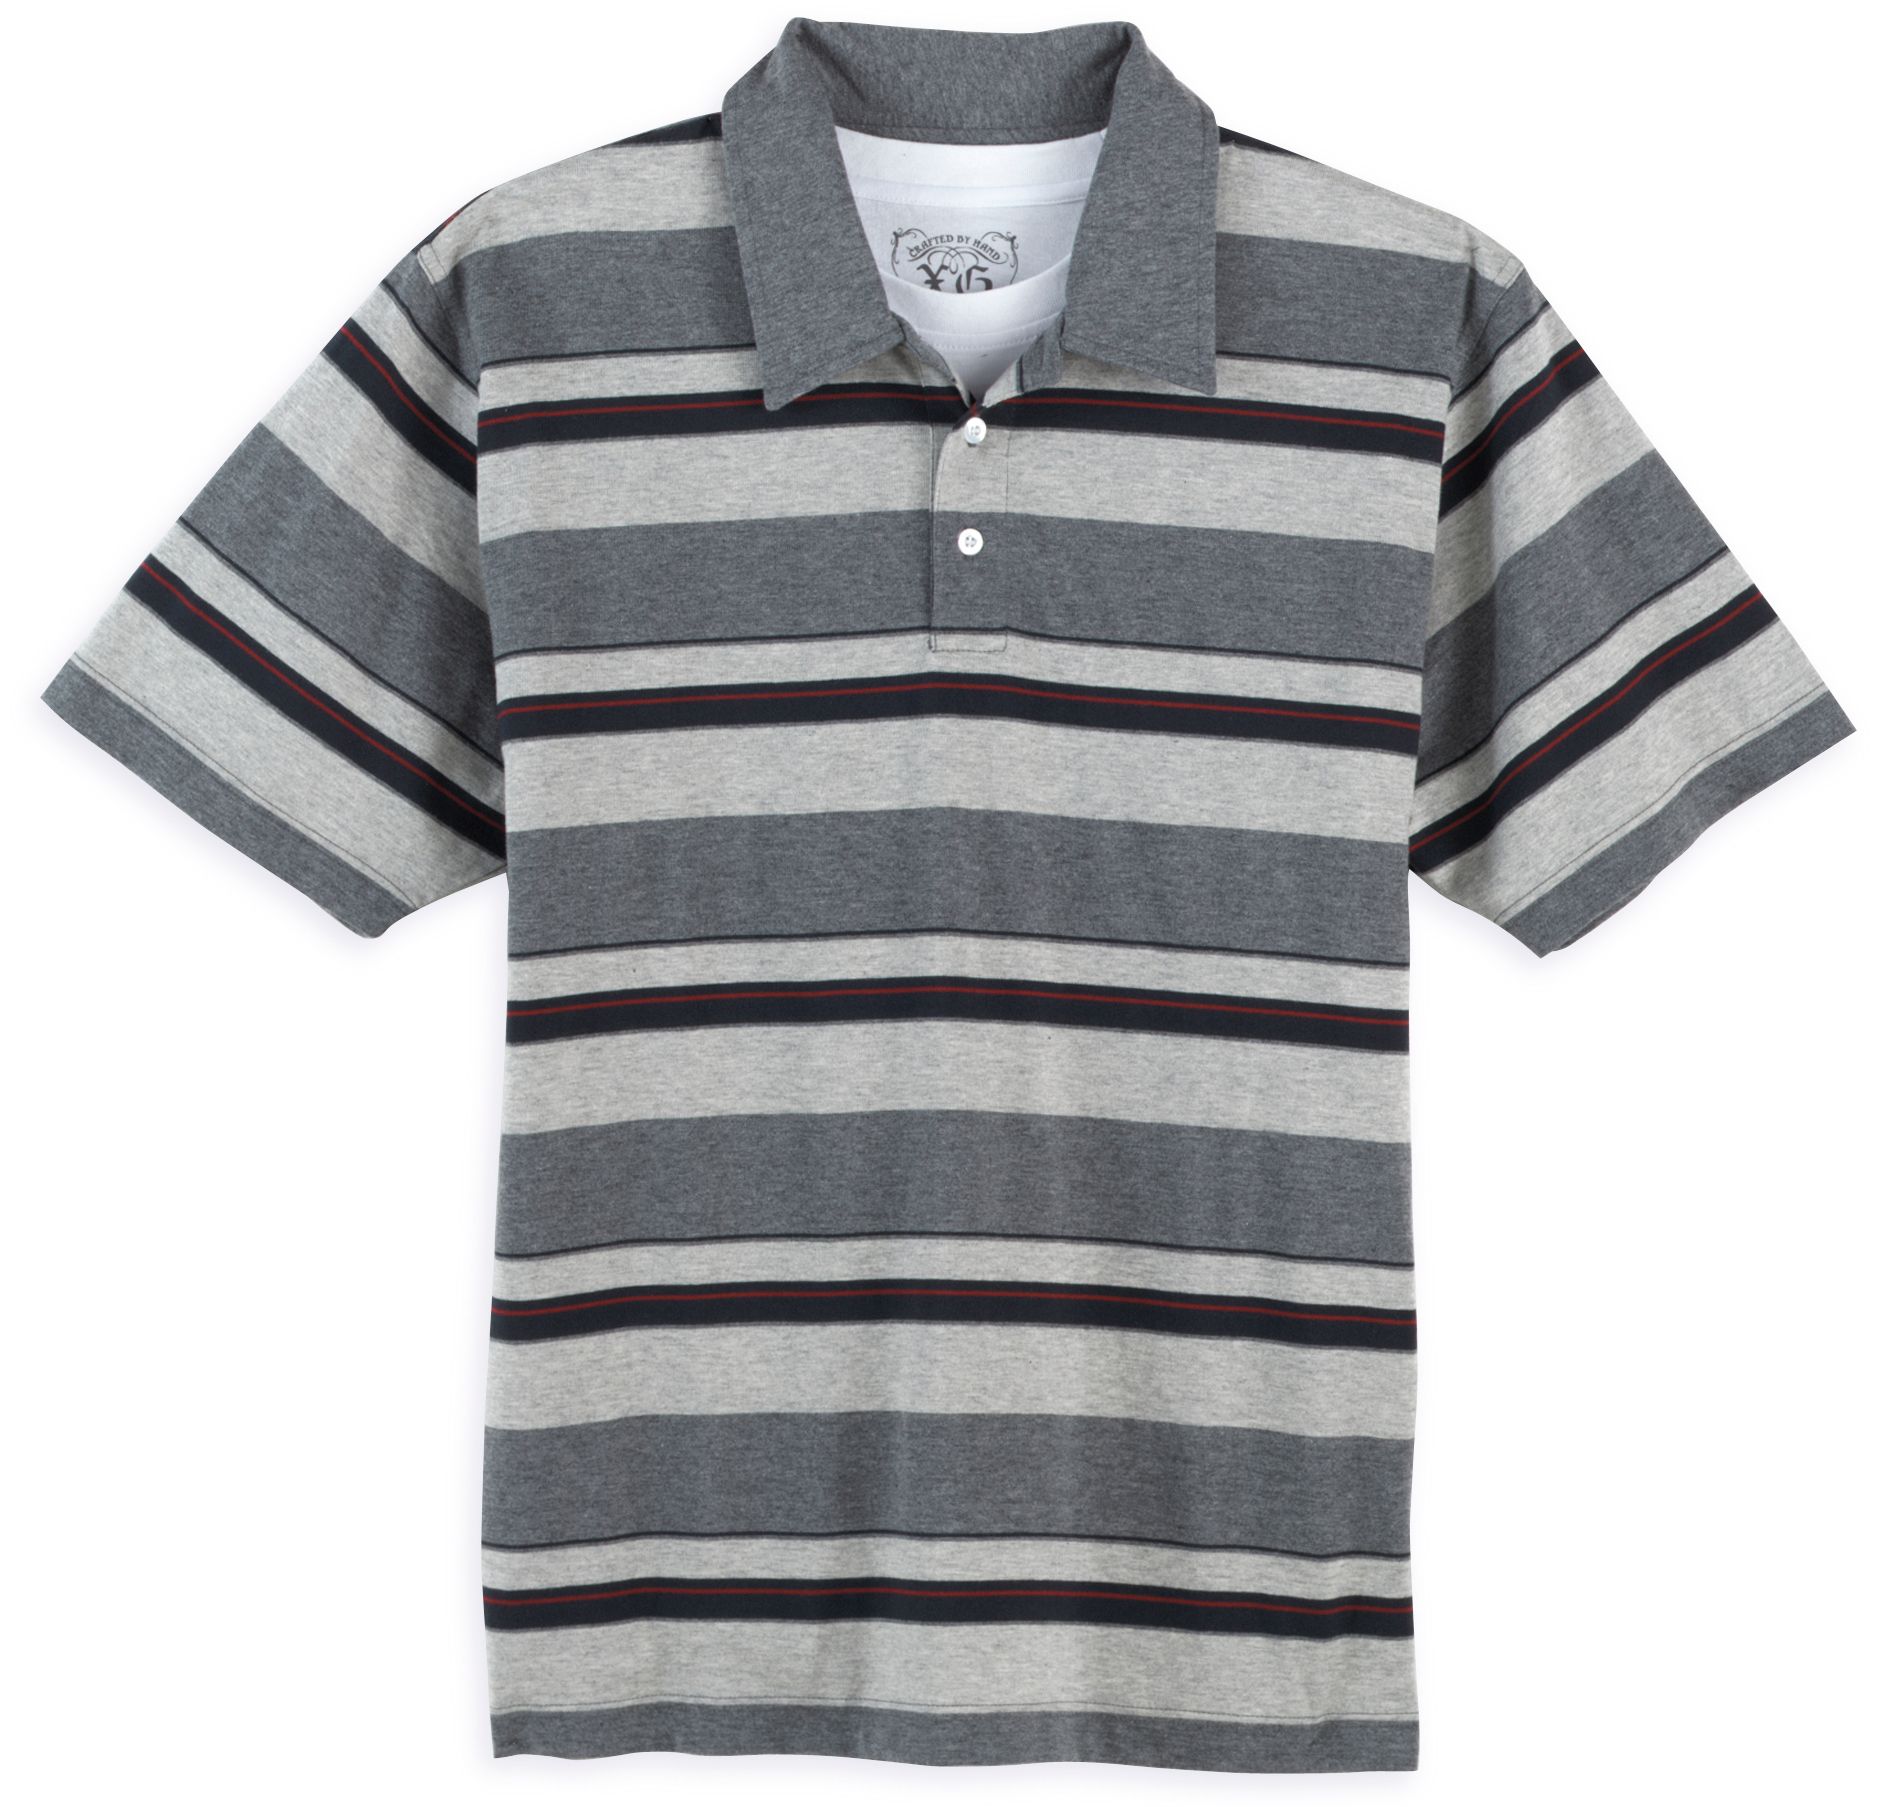 Extreme Gear Stripe Jersey Polo and Solid Tee Set